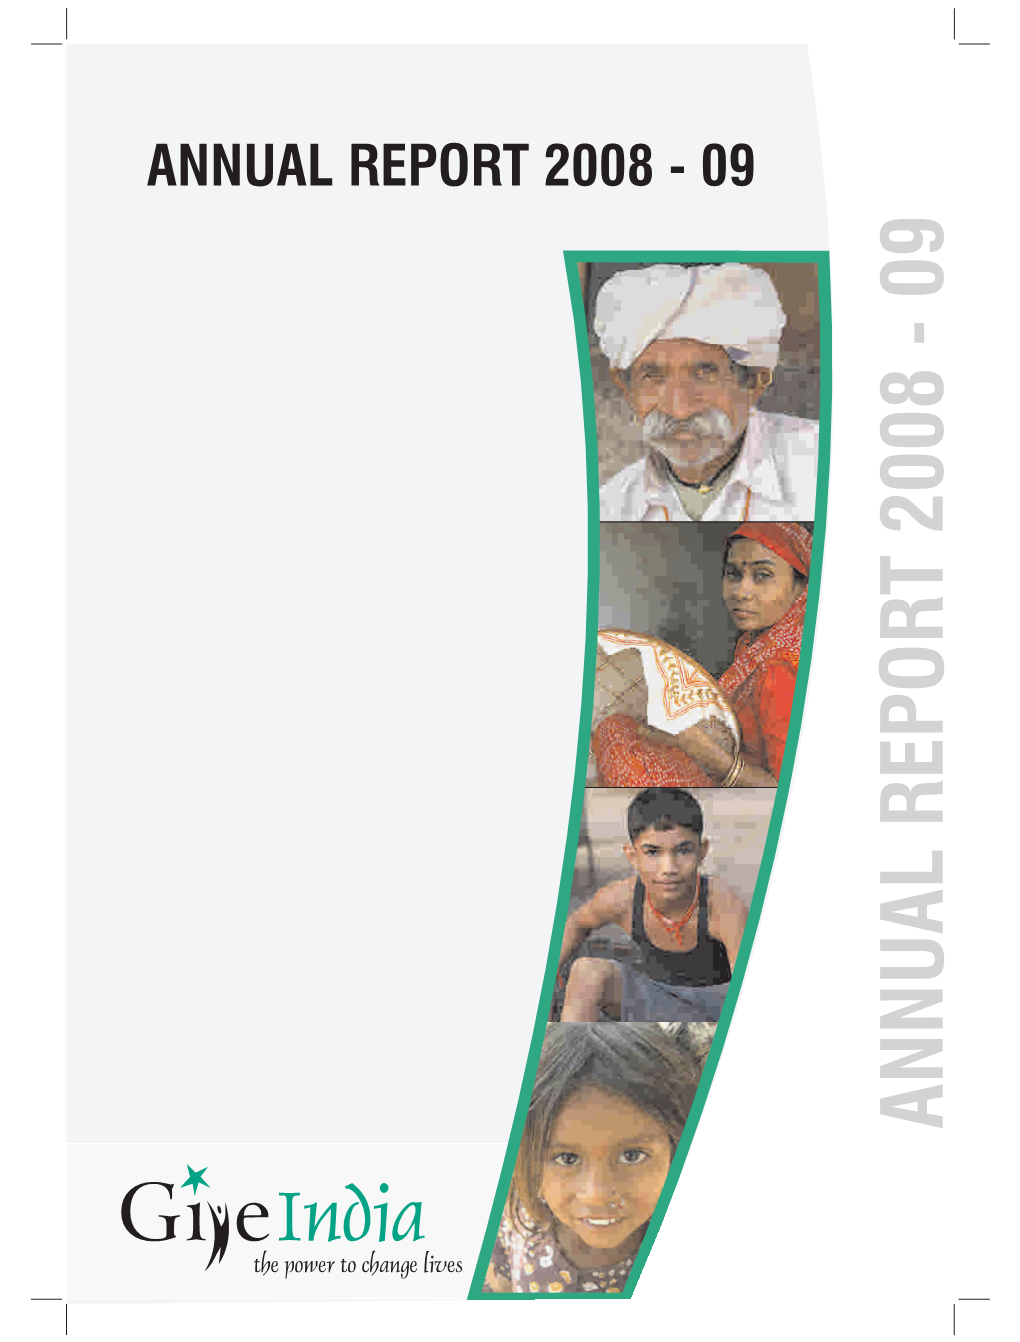 ANNUAL REPORT 2008 - 09 ANNUAL REPORT 2008 - 09 About Giveindia